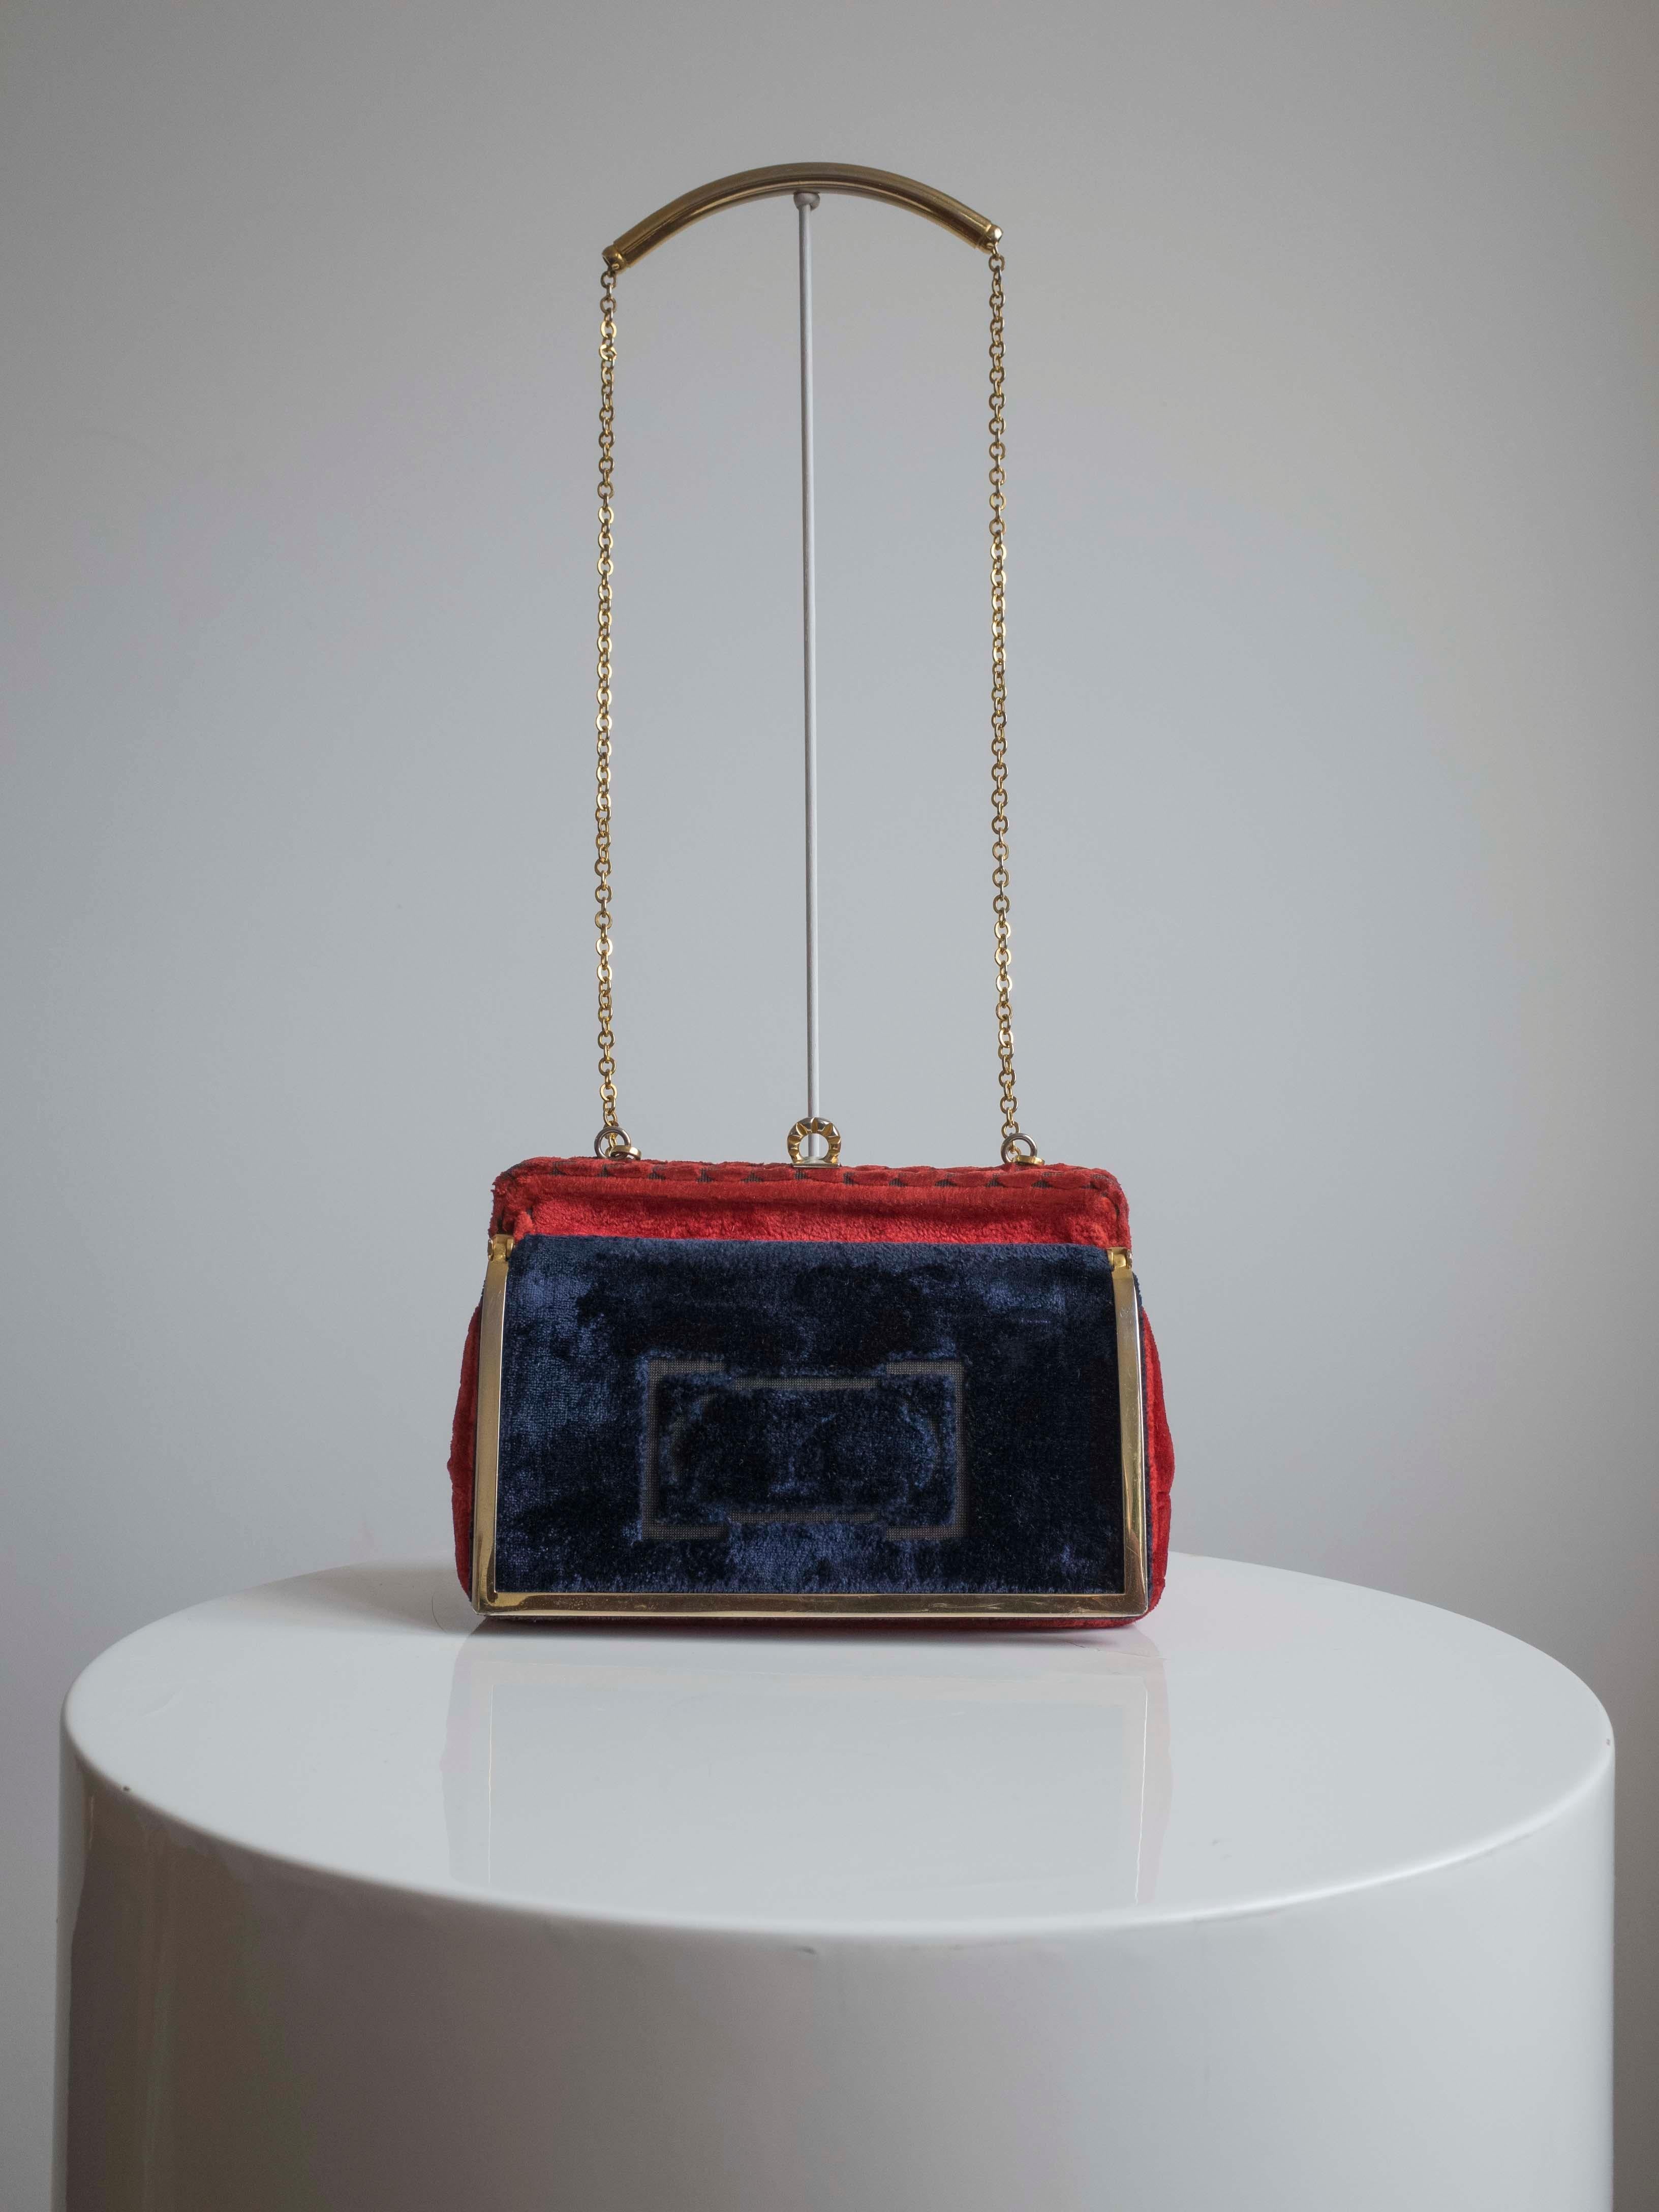 Vintage Cesare Piccini Purse

Vintage handbag by Cesare Piccini rich red velvet with contrasting navy pocket. 
Embossed scroll design in the velvet. Brass trim, clasp and chain strap,the purse opens to a main leather compartment with two smaller